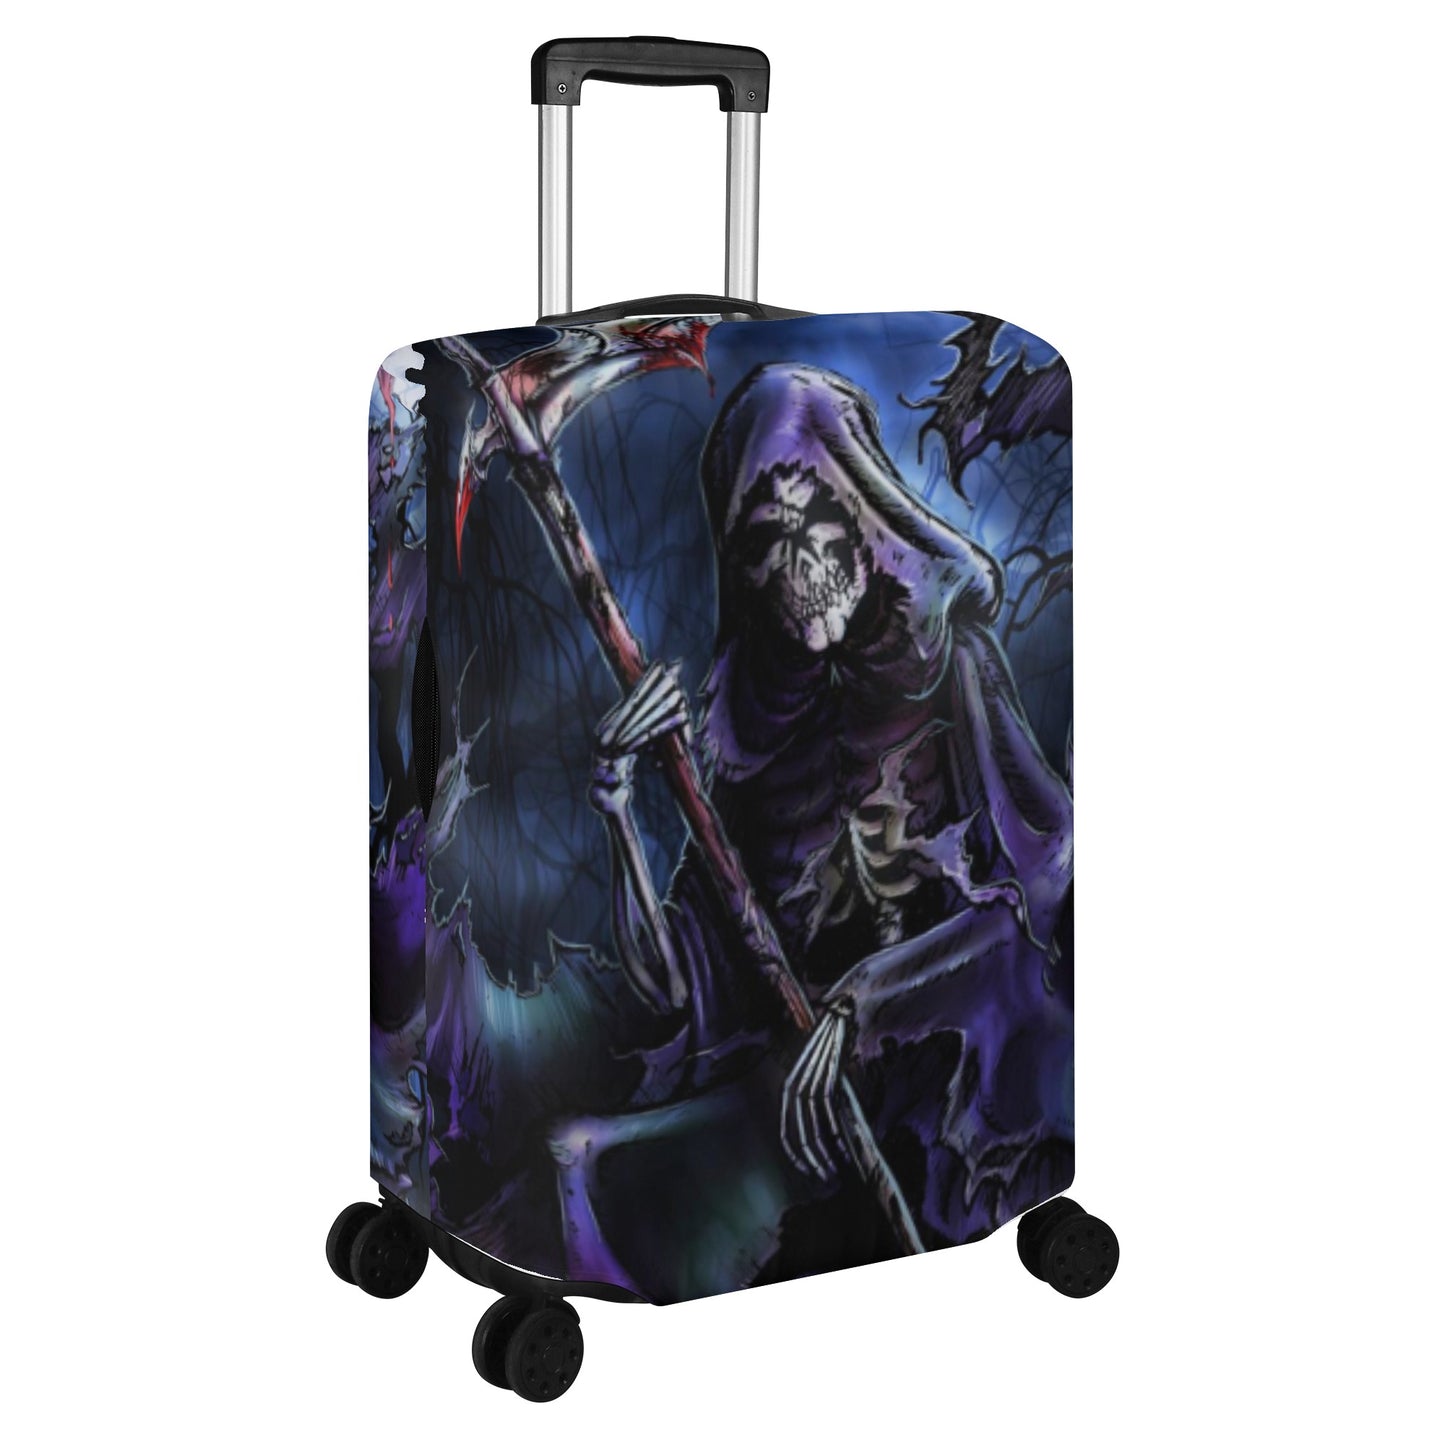 Horror skull luggage cover, Halloween suitcase cover protector